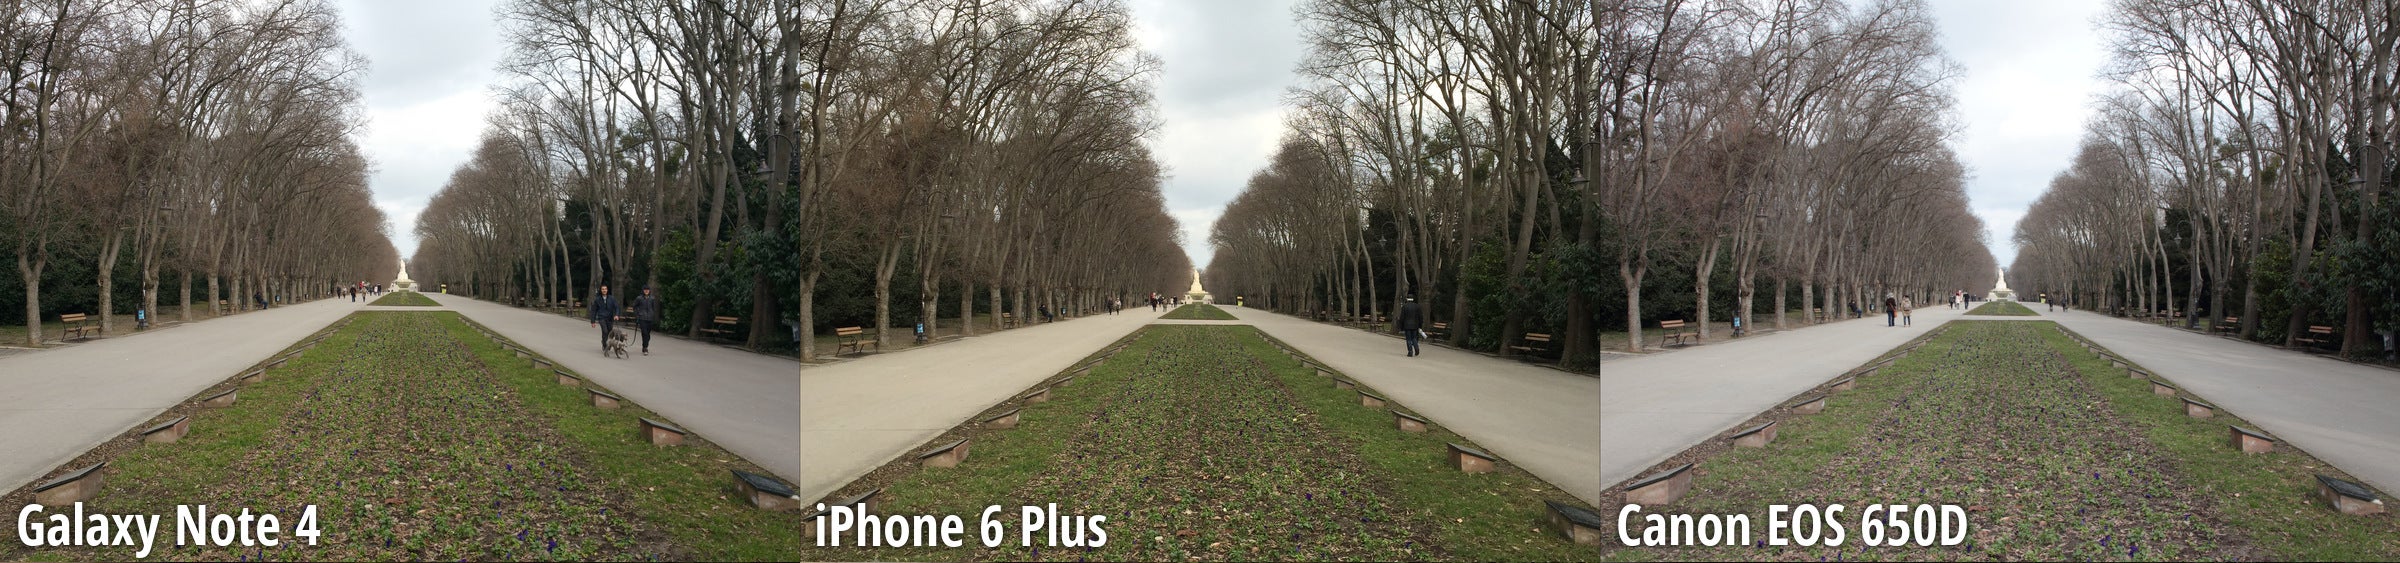 Side-by-side preview - Galaxy Note 4 dominates our blind camera comparison, beats a Canon DSLR and the iPhone 6 Plus